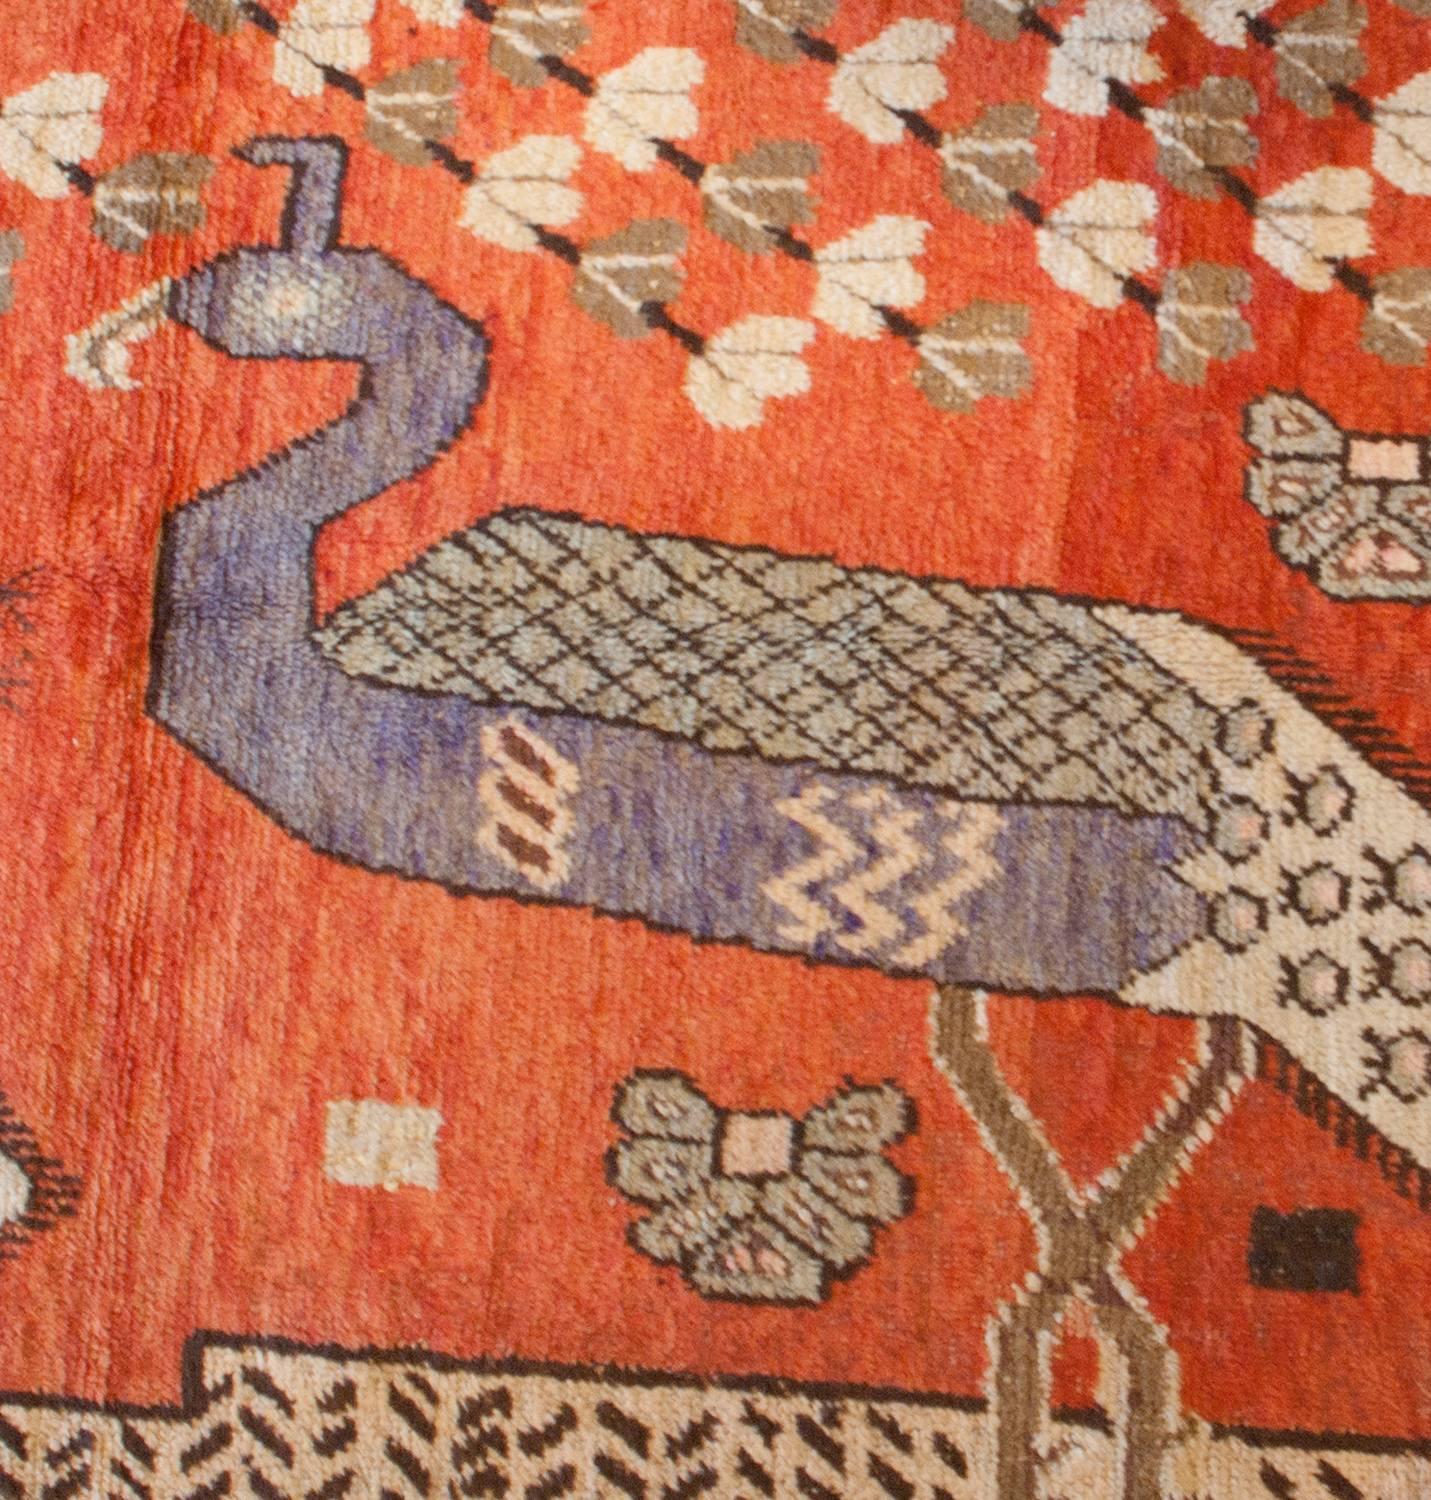 An enchanting early 20th century Eastern Turkestan pictorial Khotan rug depicting two larger-than-life peacocks amidst a field of peonies, resting under a shade tree. The background is a brilliant burnt orange, with three additional birds woven in